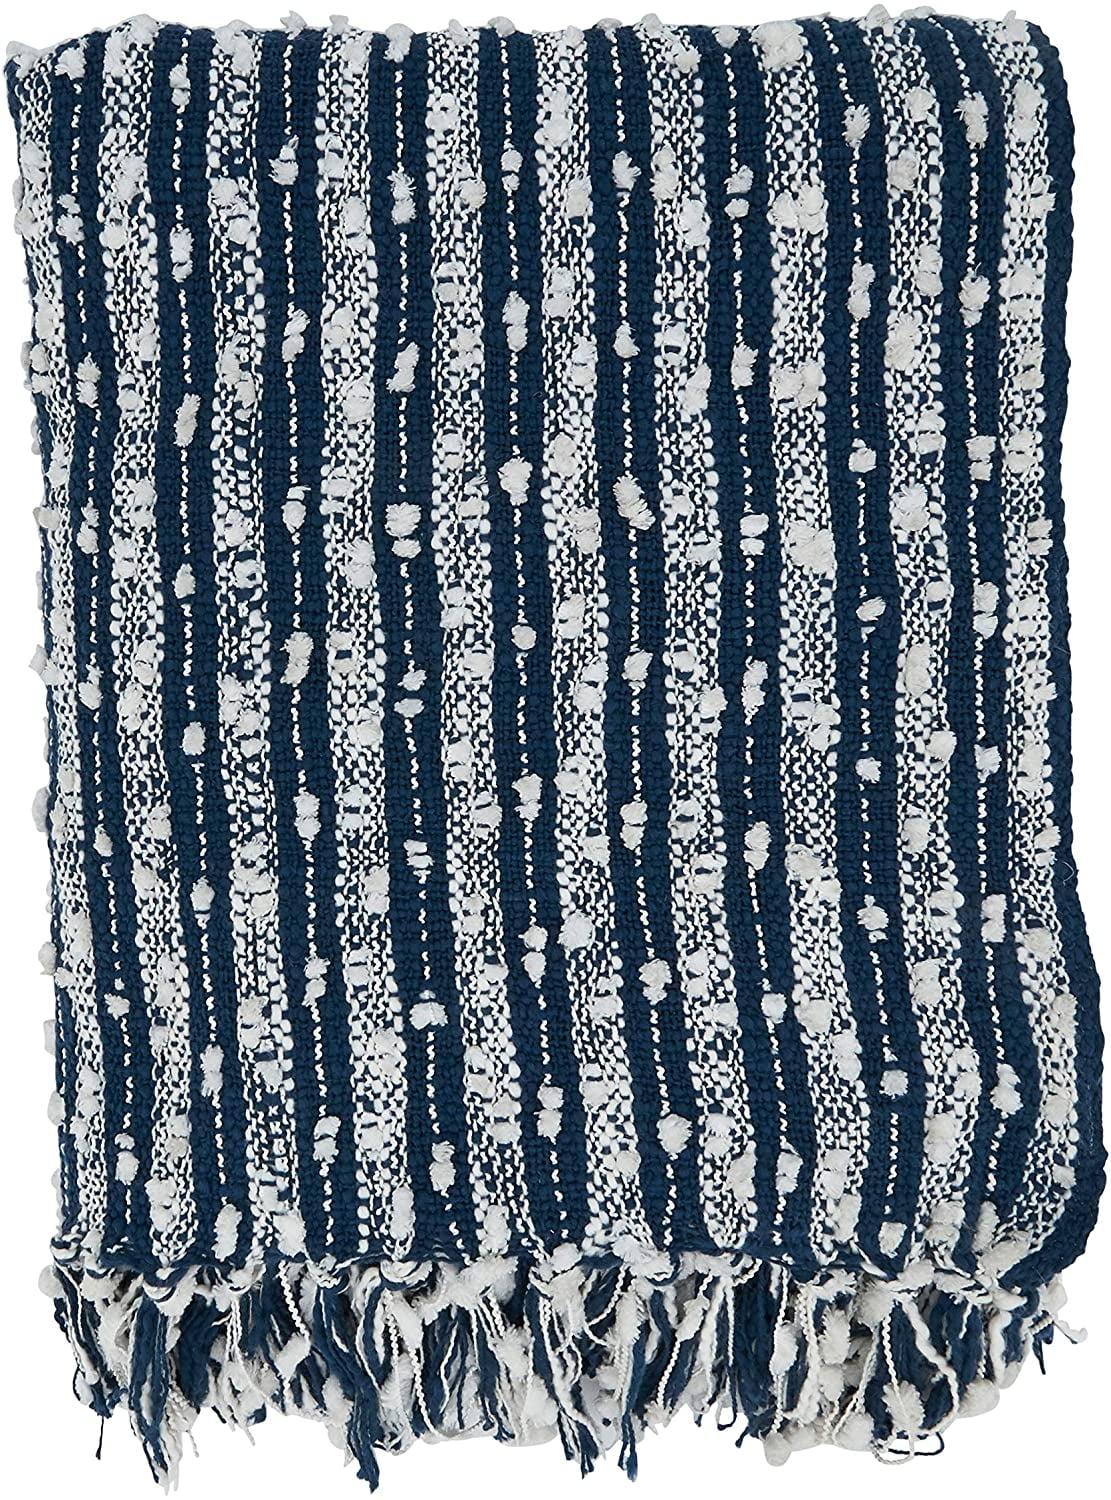 Casual Navy Blue Striped Cotton Fringe Throw Blanket 50" x 60"